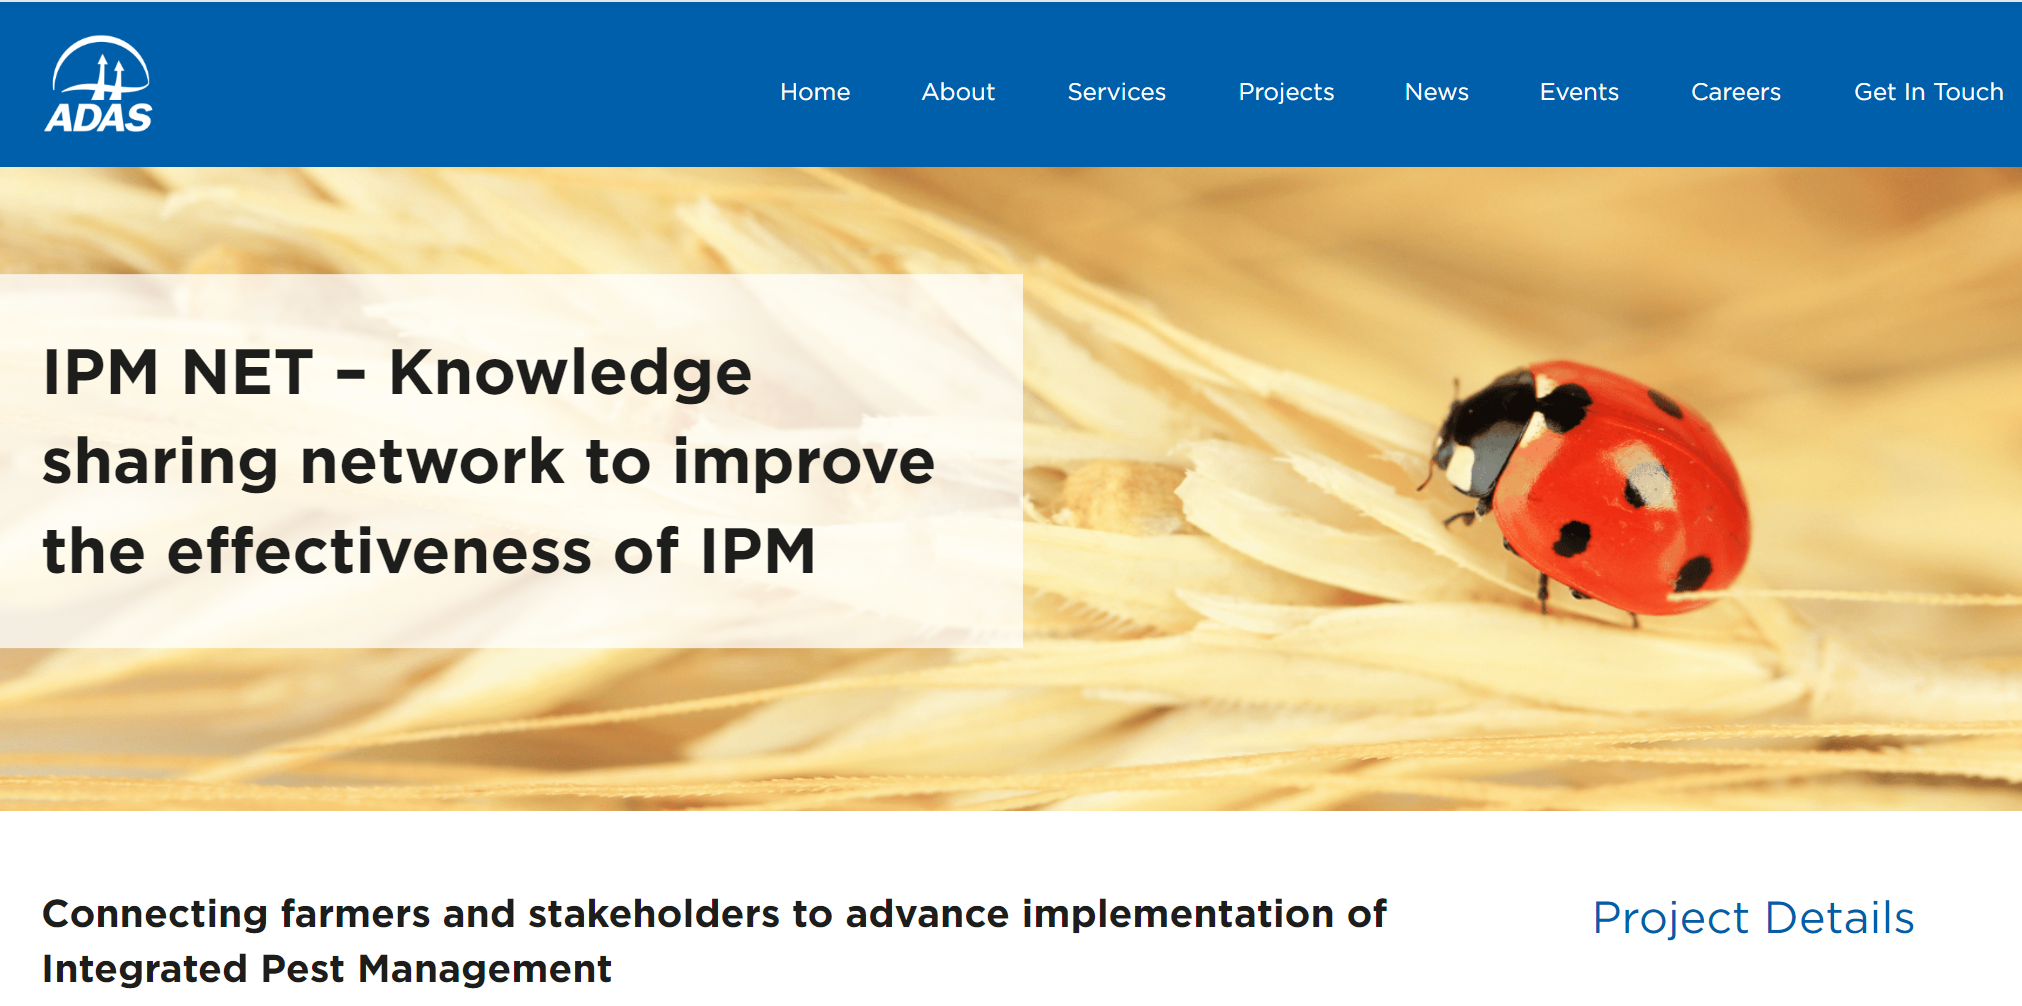 IPM NET initiative launched